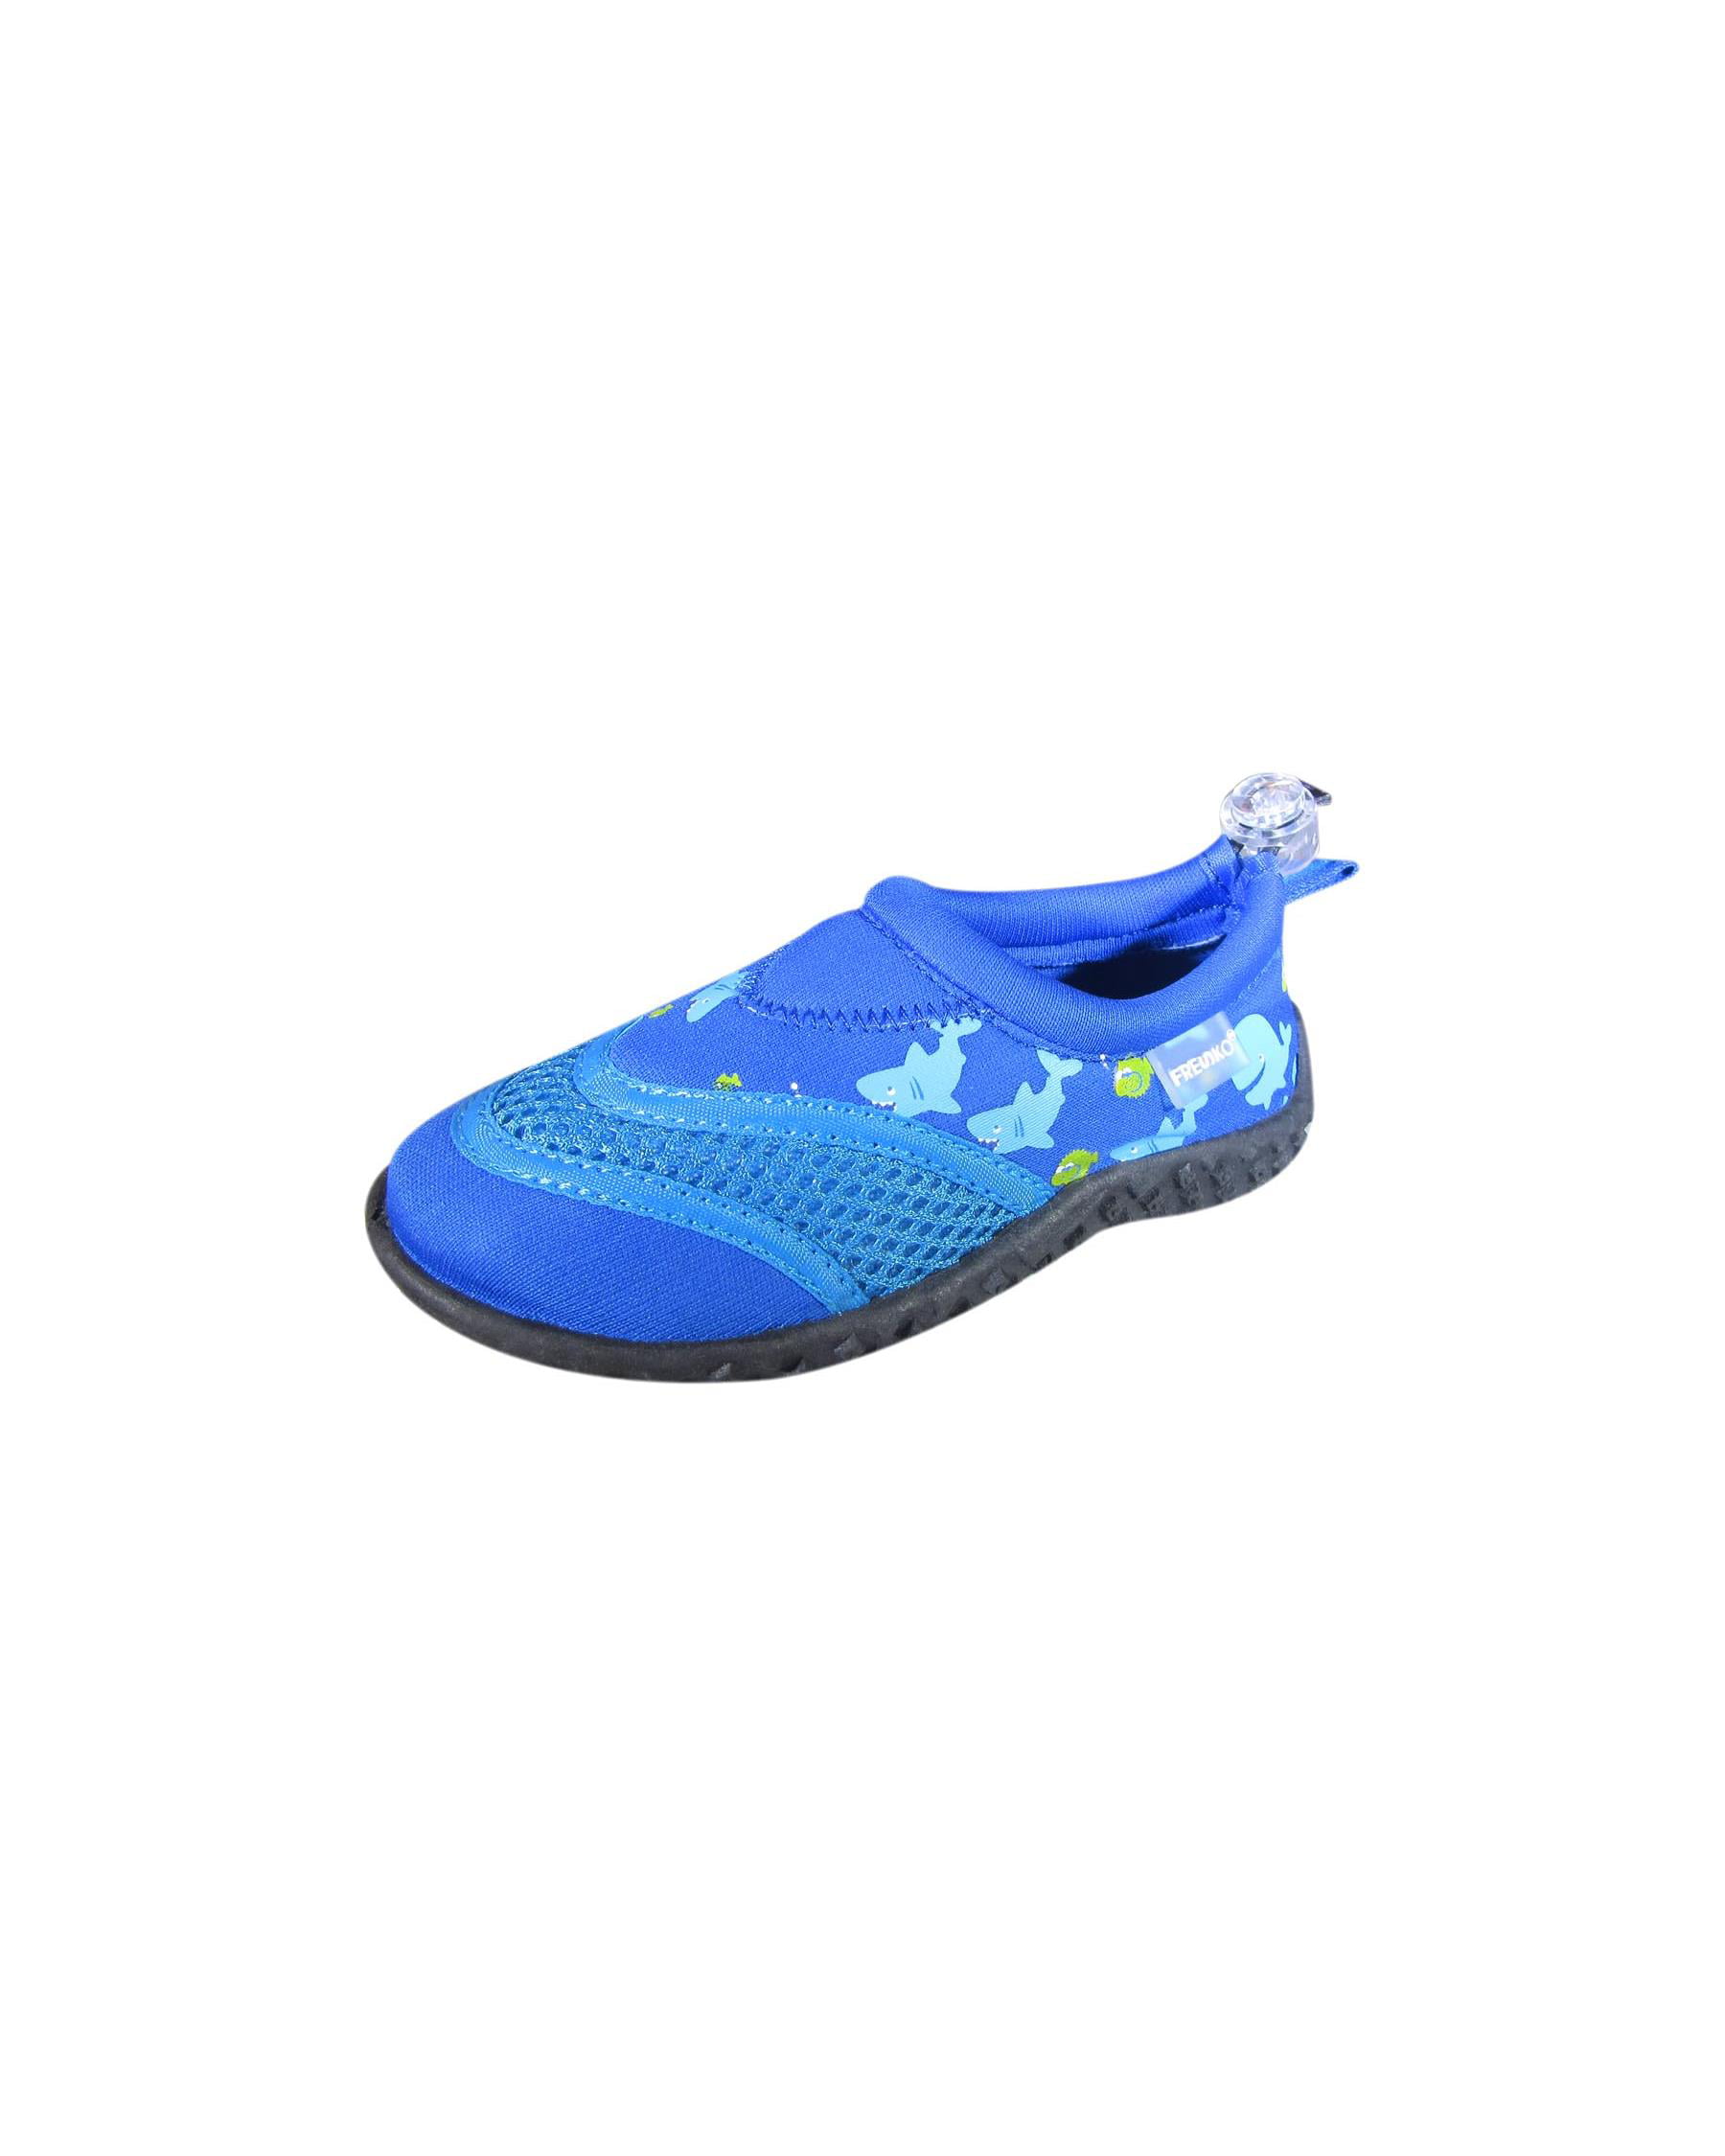 boys water shoes size 5